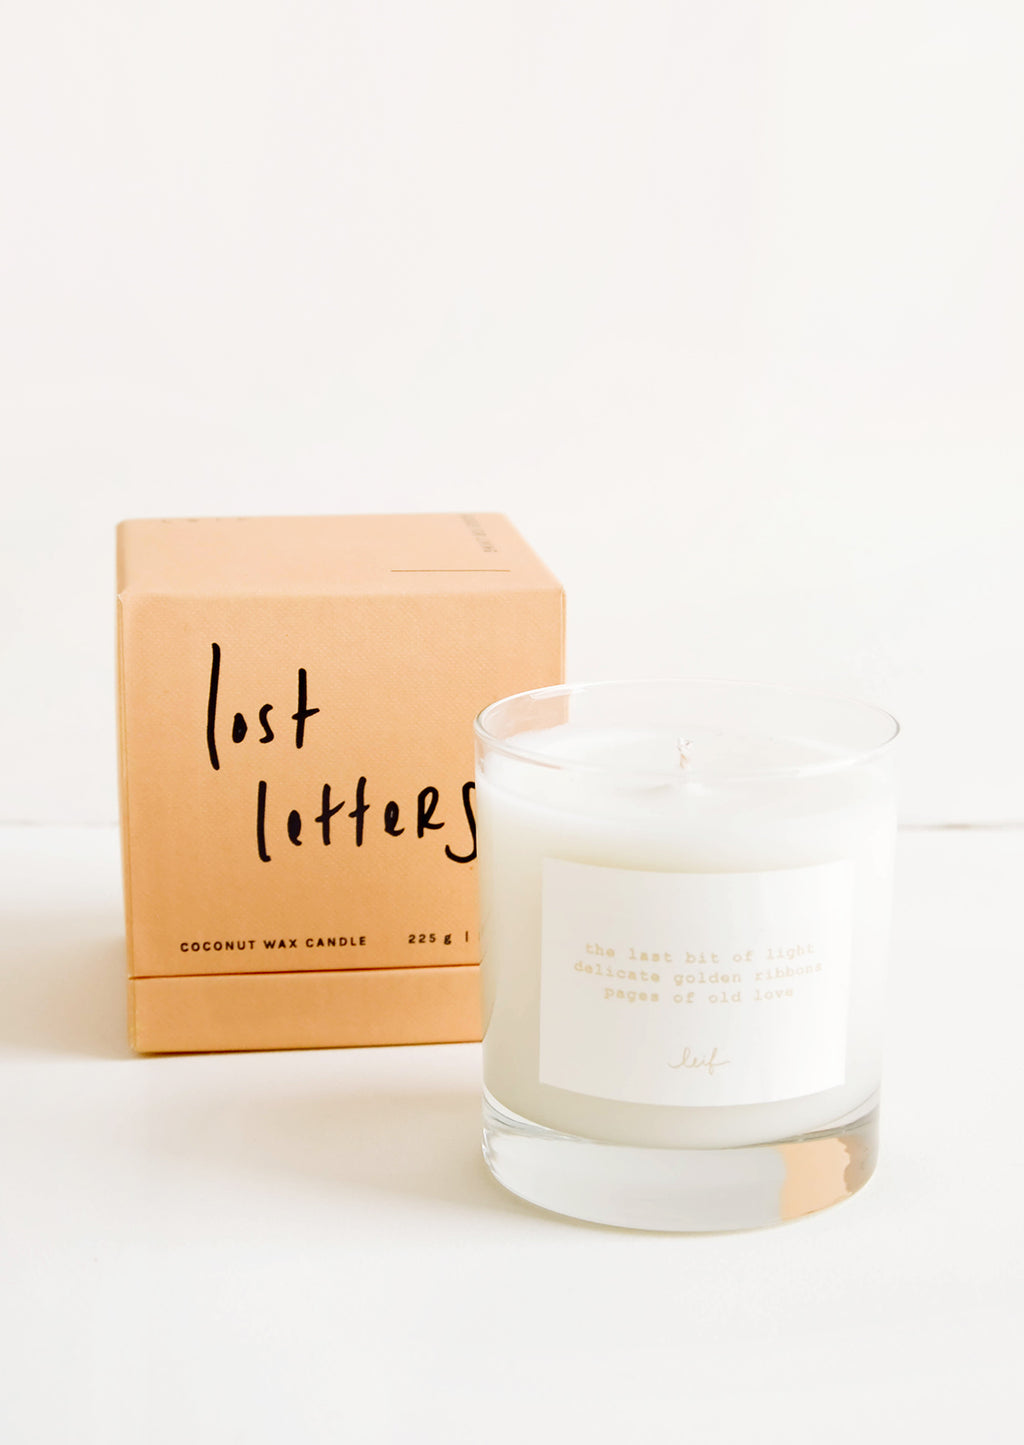 Lost Letters: A glass candle with a white label sits next to a peach colored box reading "lost letters" in black cursive text.